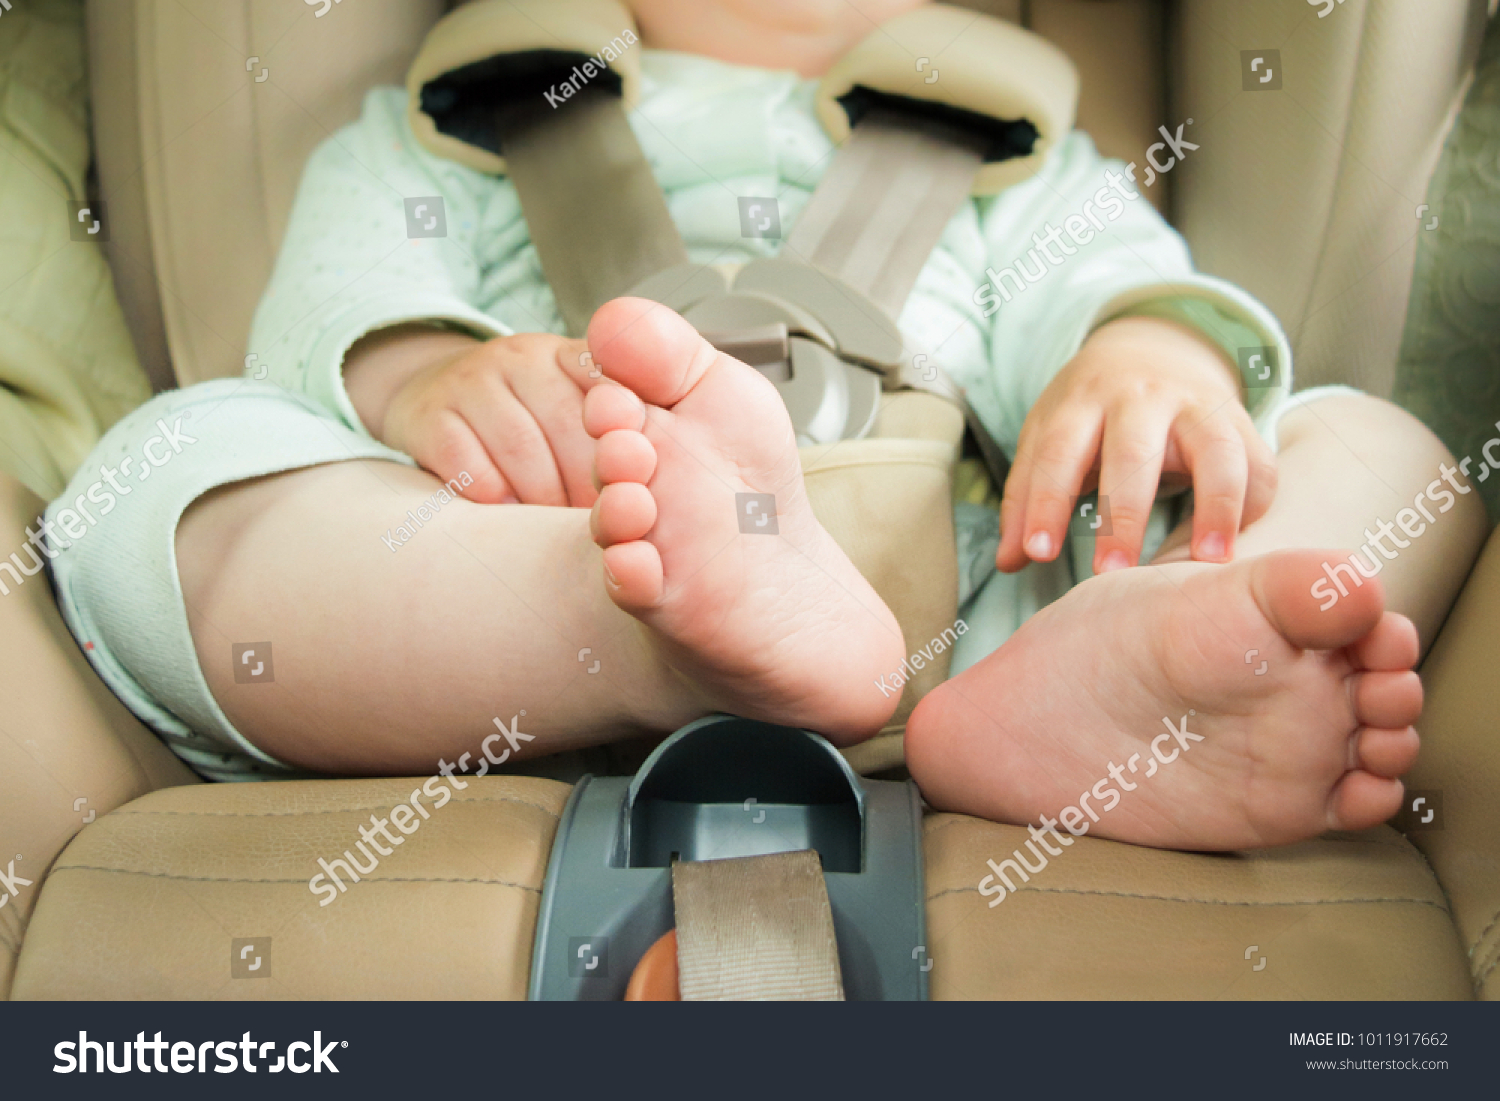 Small baby sitting in special car seat with safety seabelts, Safety in car concept, protection of child in travel, children feet in baby seat #1011917662